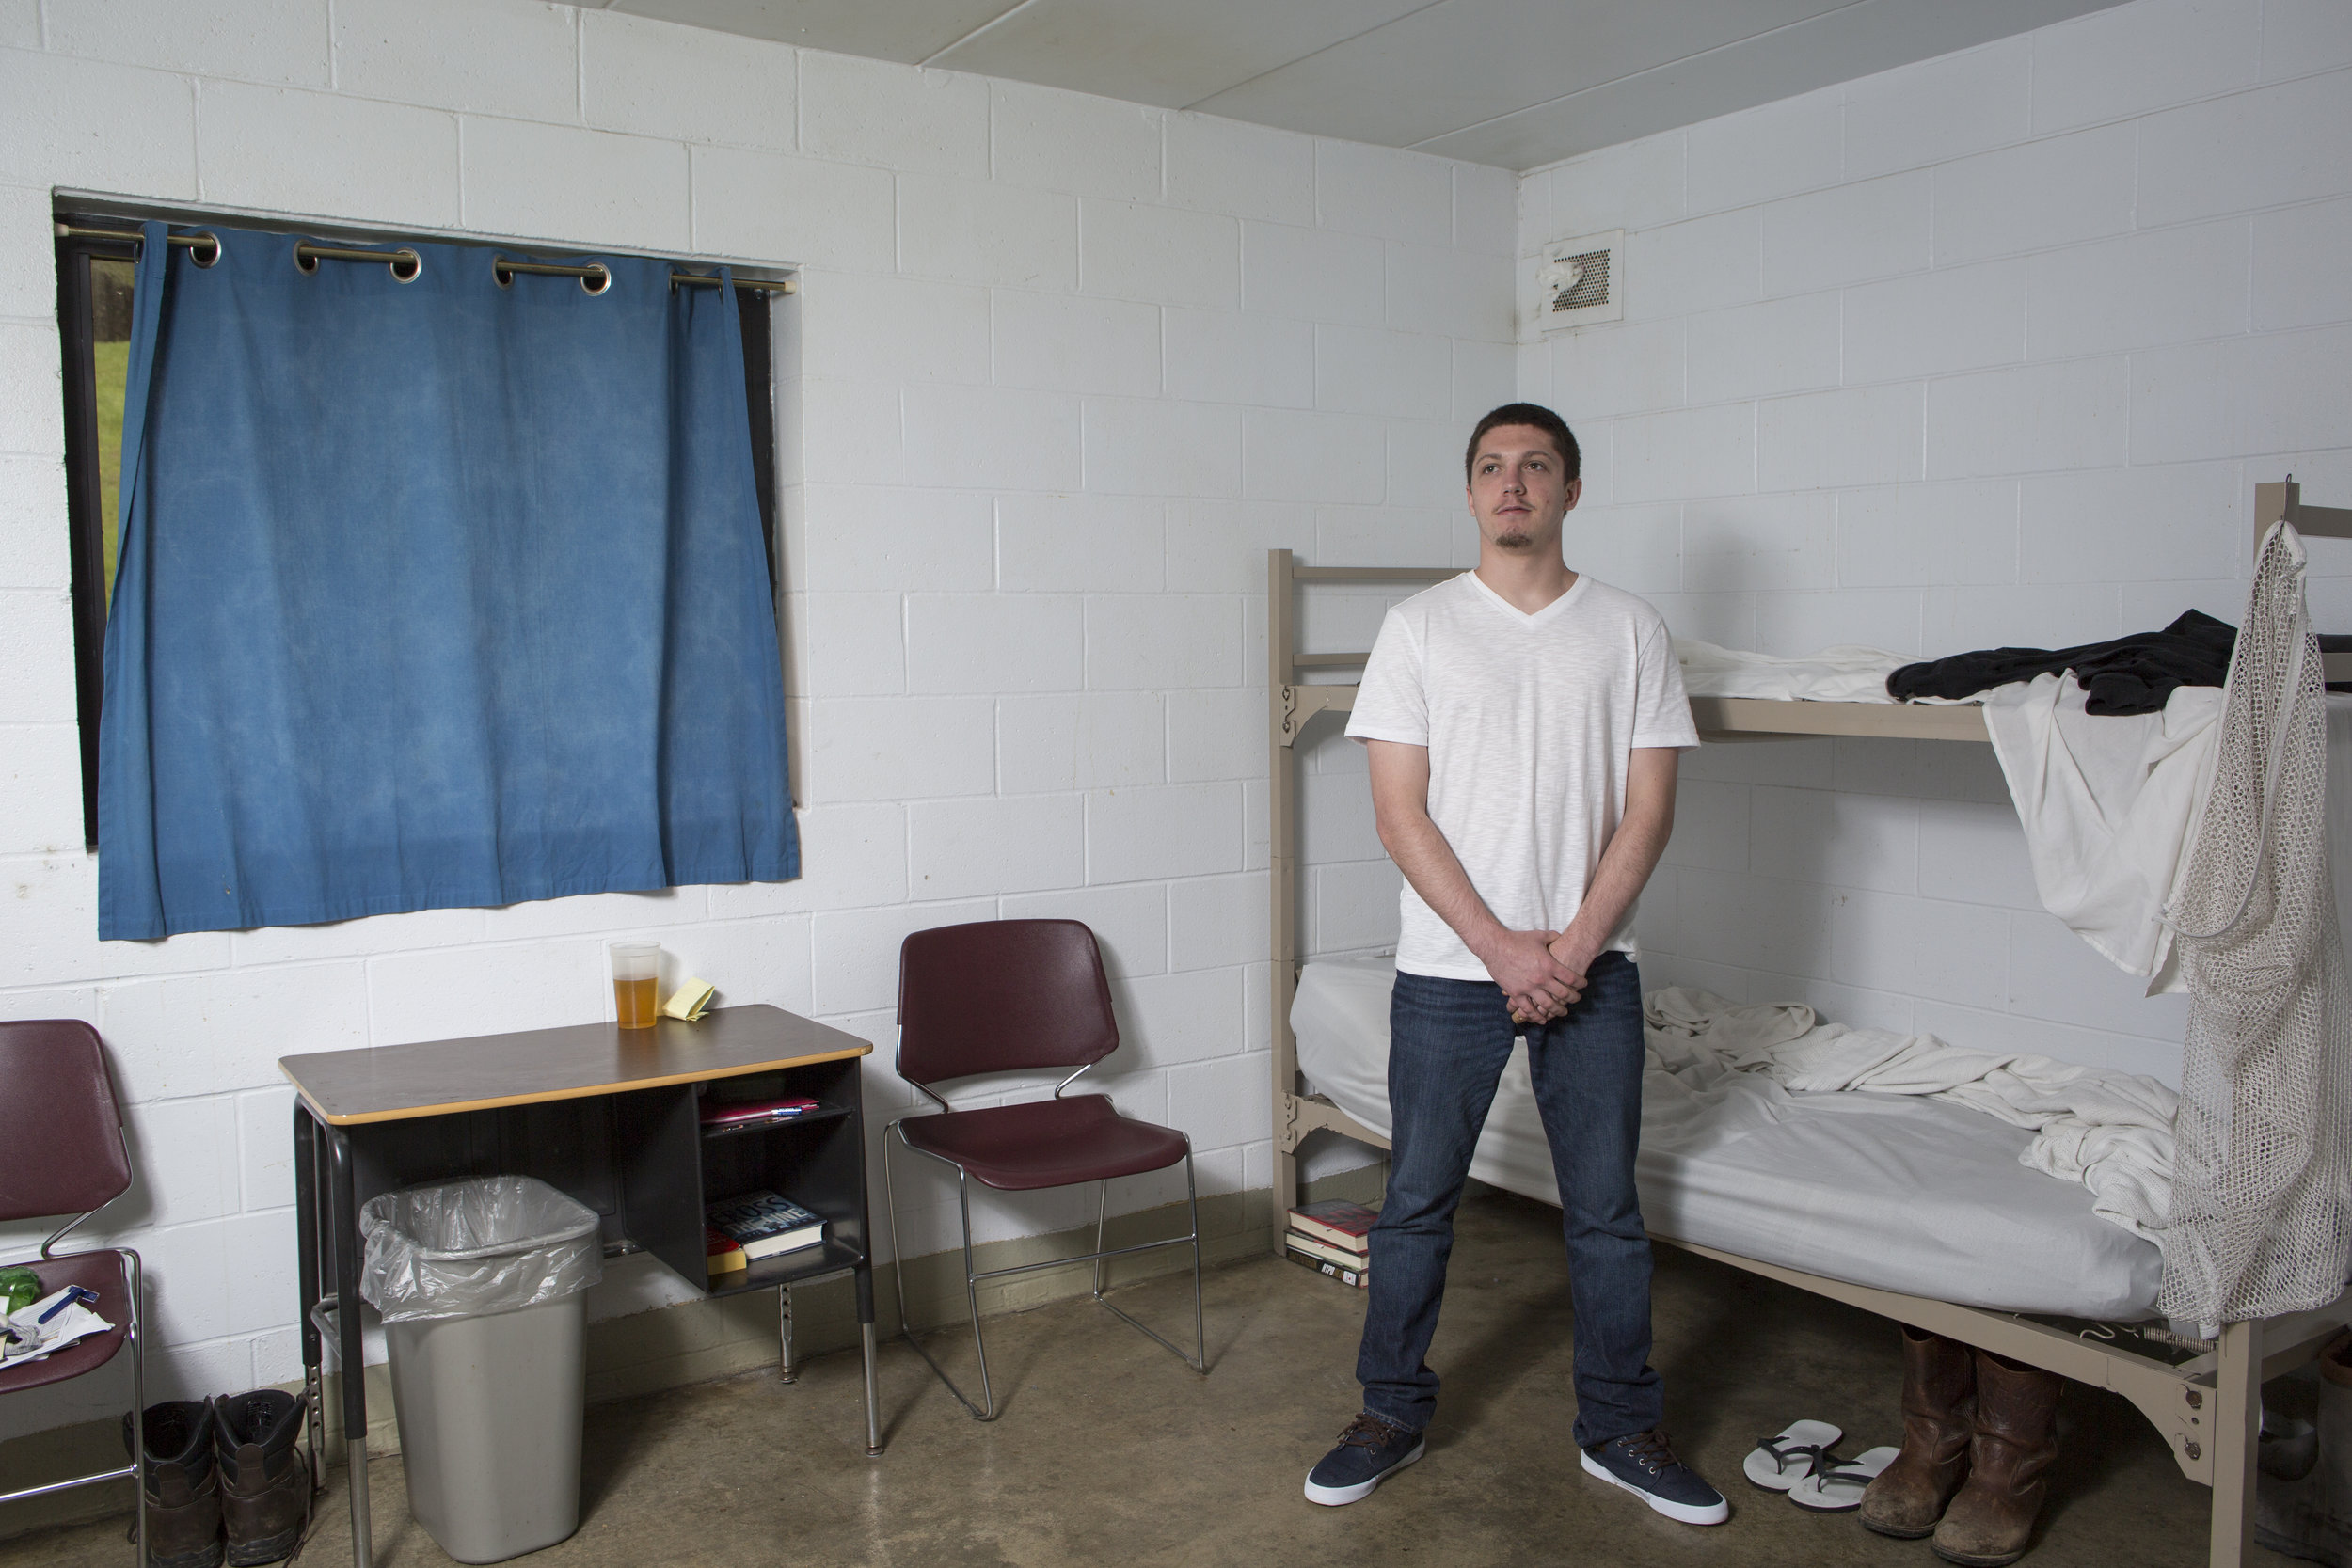  James, a resident at SEPTA Correctional Facility, stands in his room at the correctional facility in Nelsonville, Ohio. SEPTA houses non-violent inmates and offers them programs in an attempt to help them transition back into society. 